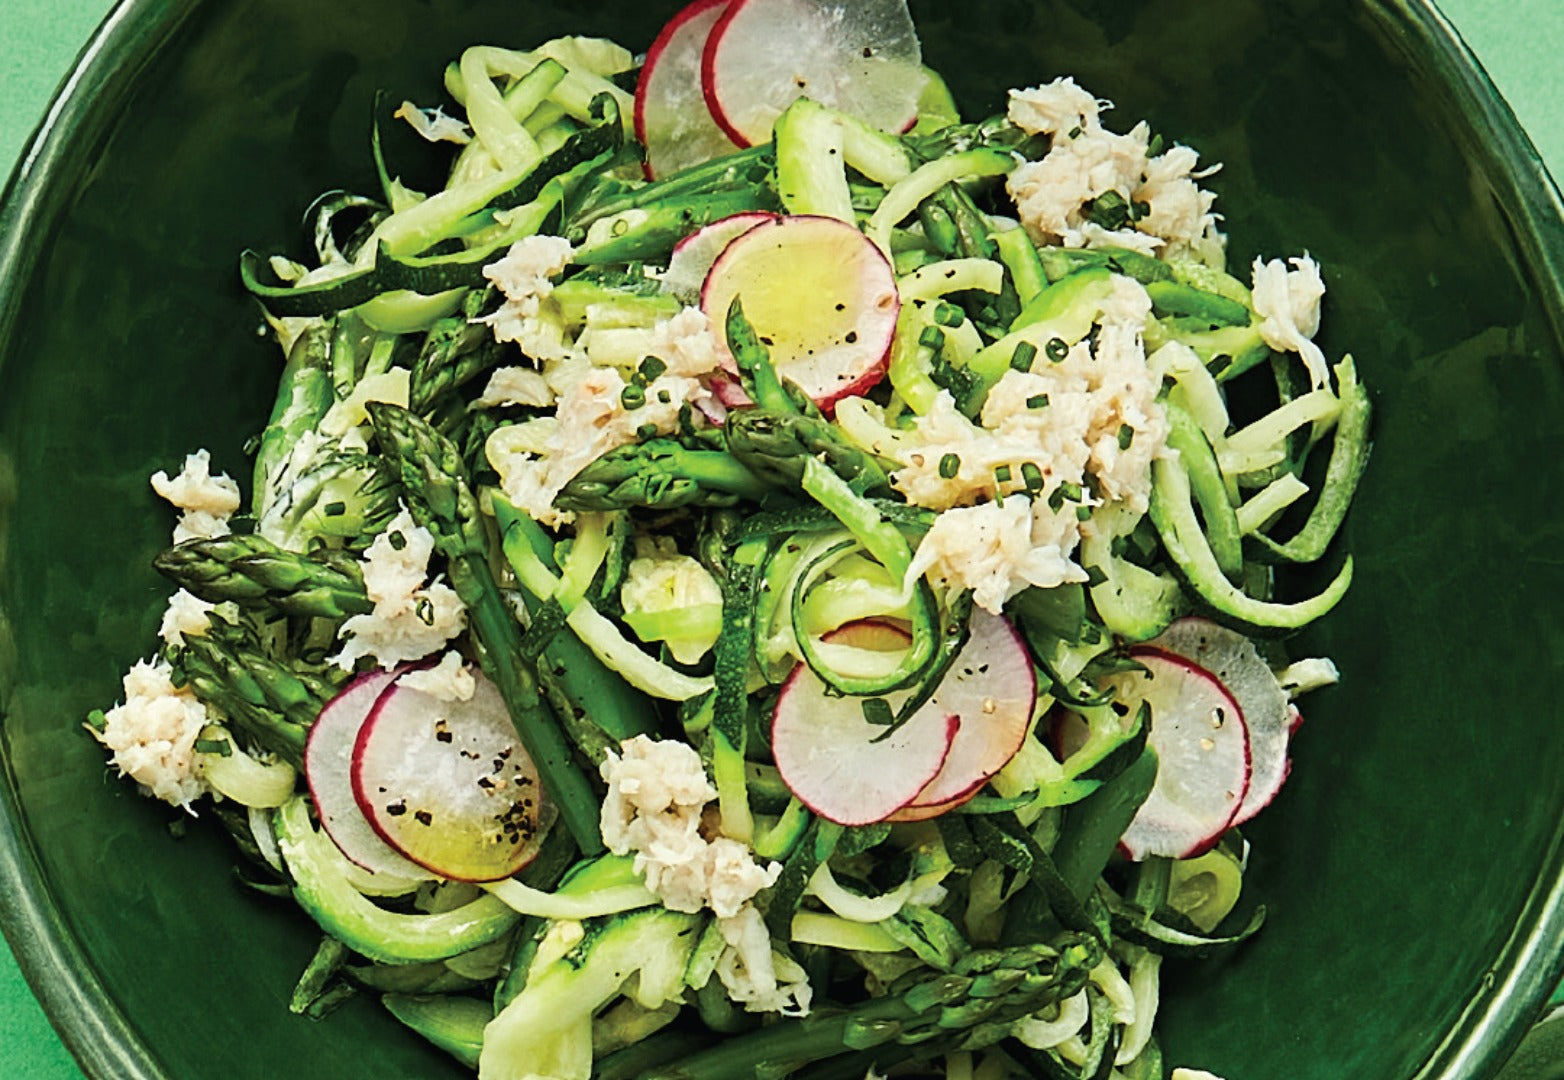 A bowl of zucchini noodles dressed with blue swimmer crab meat and thinly sliced radishes